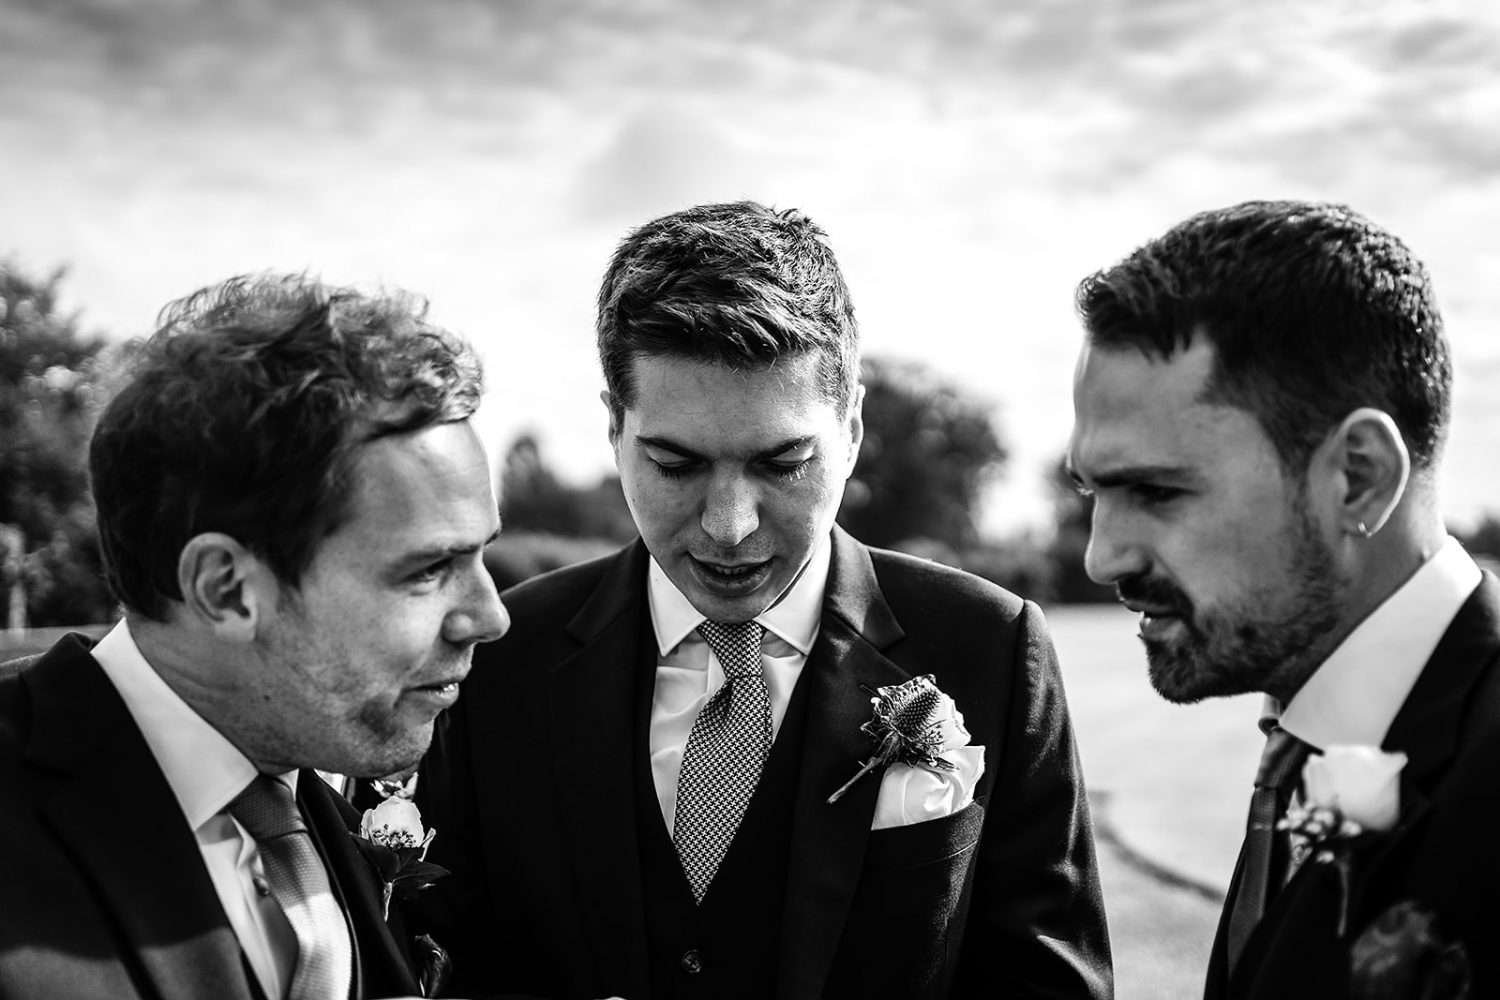 A sunny morning and a Groom looks down to check a list of details for his wedding day. To his left and right, in the front of the frame are his best man and usher who are also discussing details of the day. They all look a little concerned and occupied!